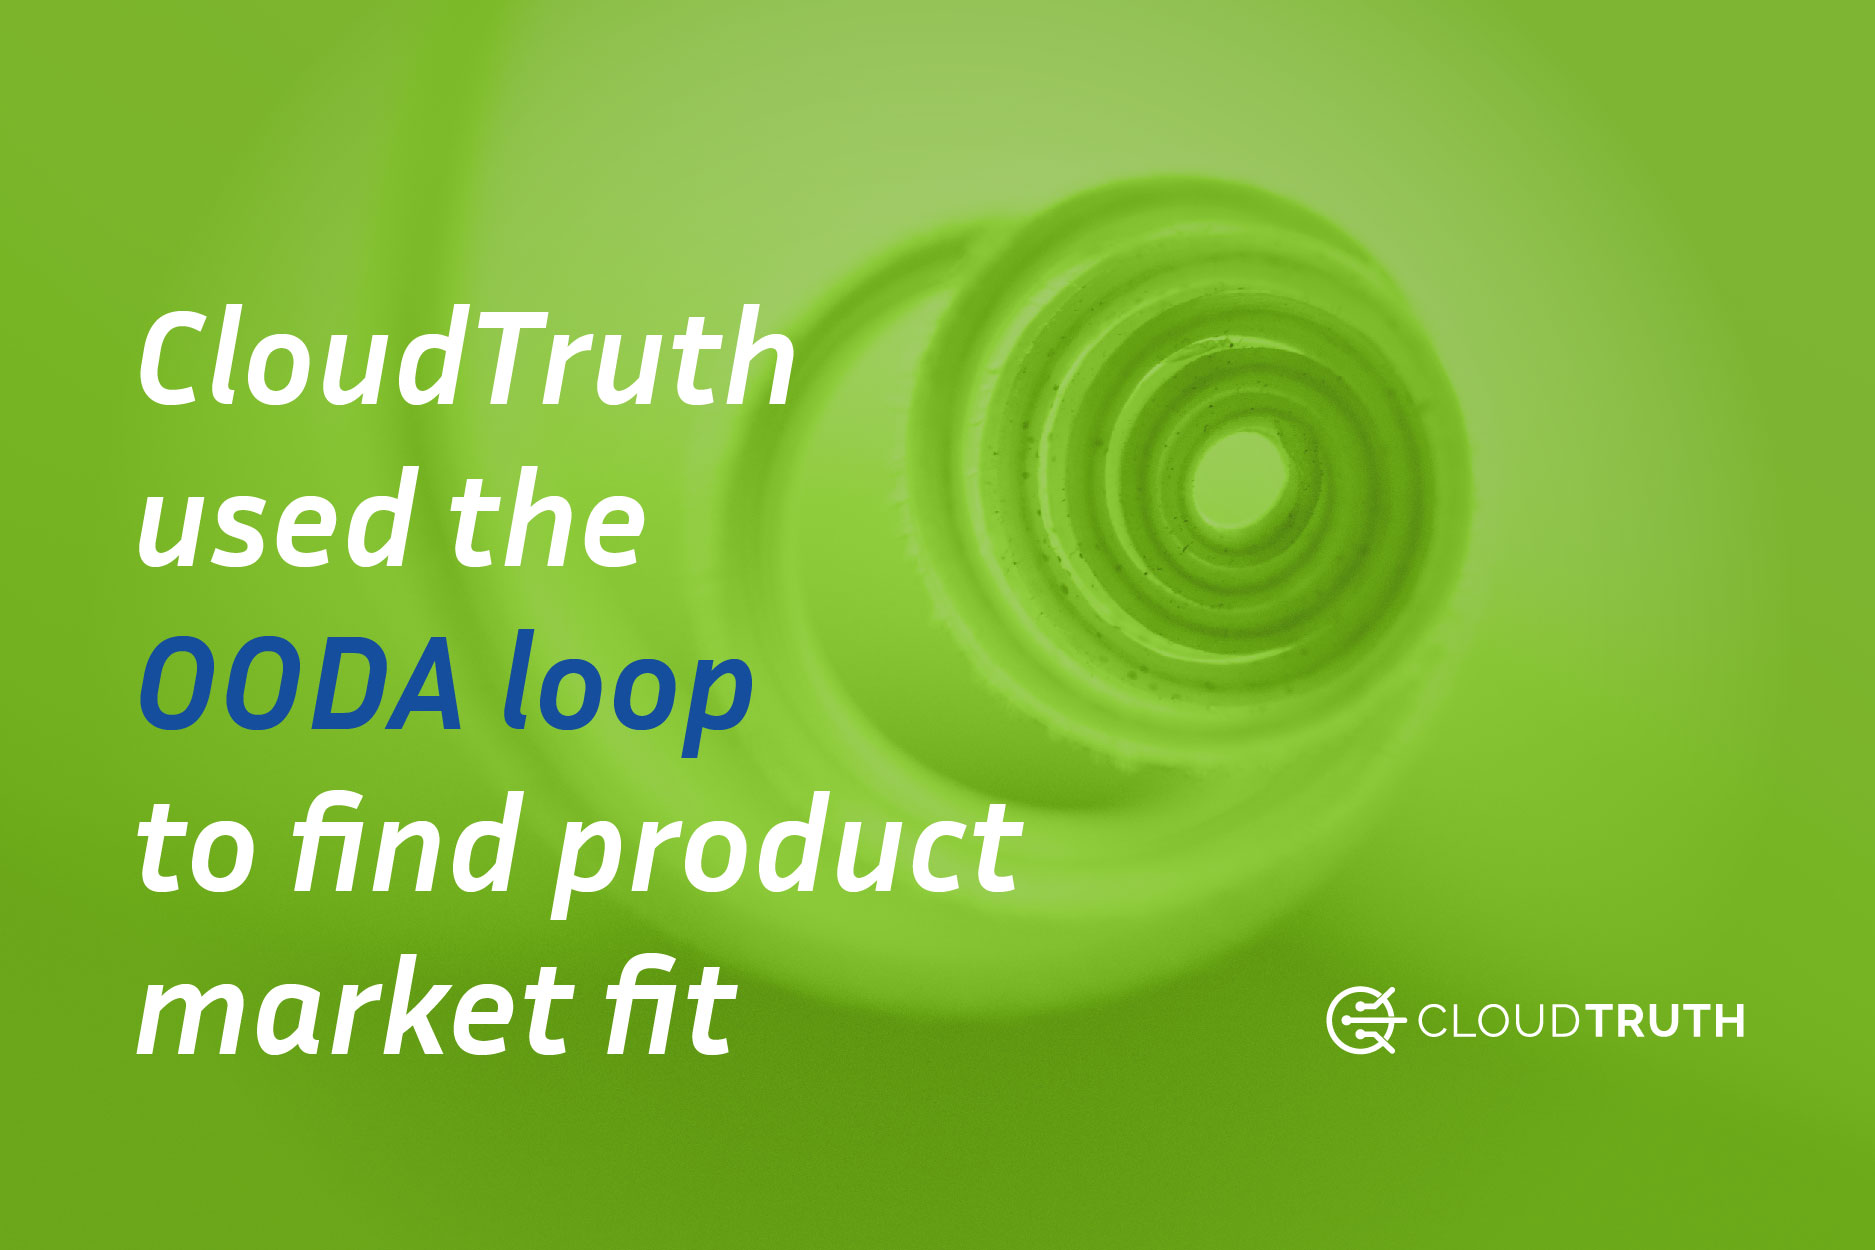 How a Military Framework Helped CloudTruth Find Product-Market Fit